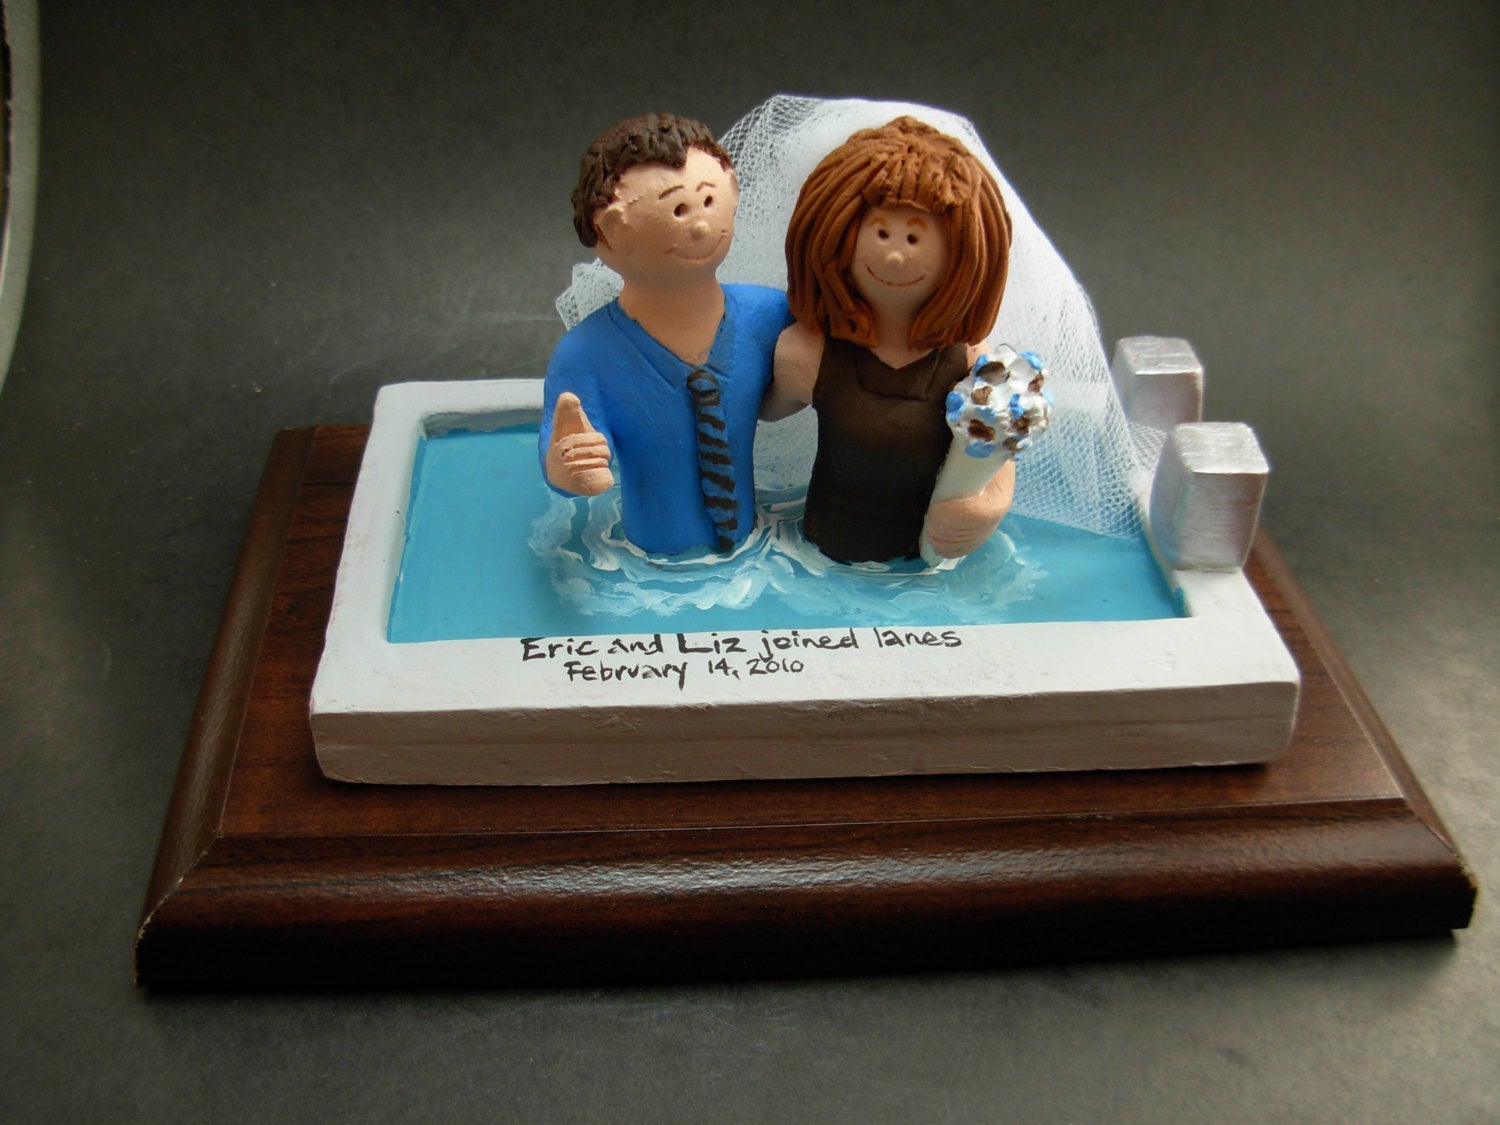 Swimmers in Pool Wedding Cake Topper, Swimming Pool Wedding Cake Topper, Hot Tub Wedding Cake Topper, Swimming Bride Wedding Cake Topper - iWeddingCakeToppers